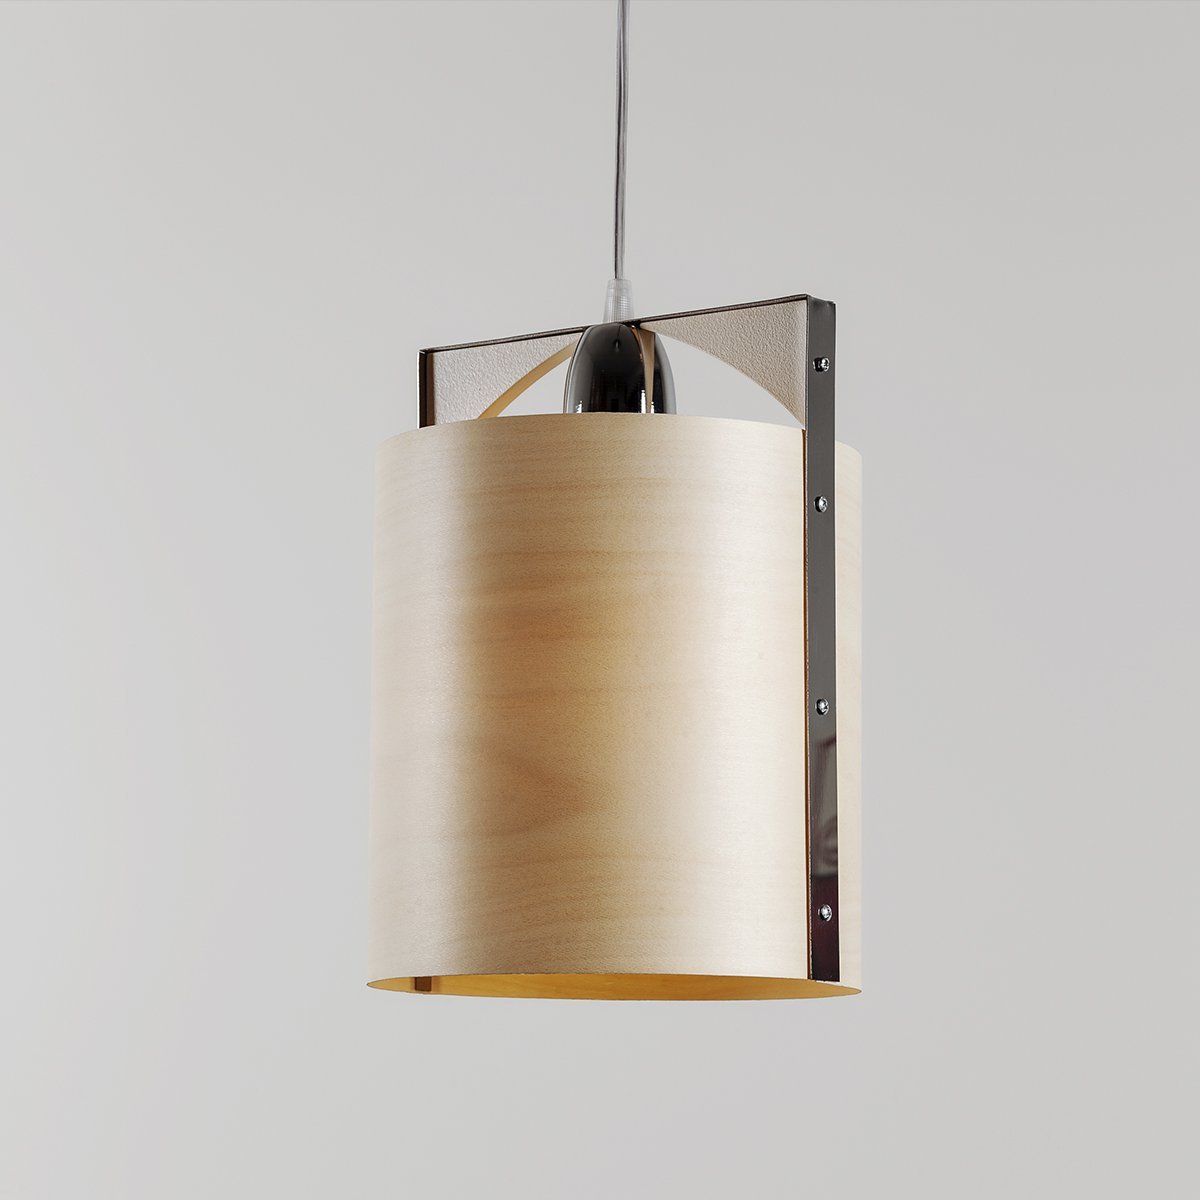 Primary image for Sax 250 Lighting-Pendant Light-Ceiling Light-Wood Veneer Lamp Manually Crafted 